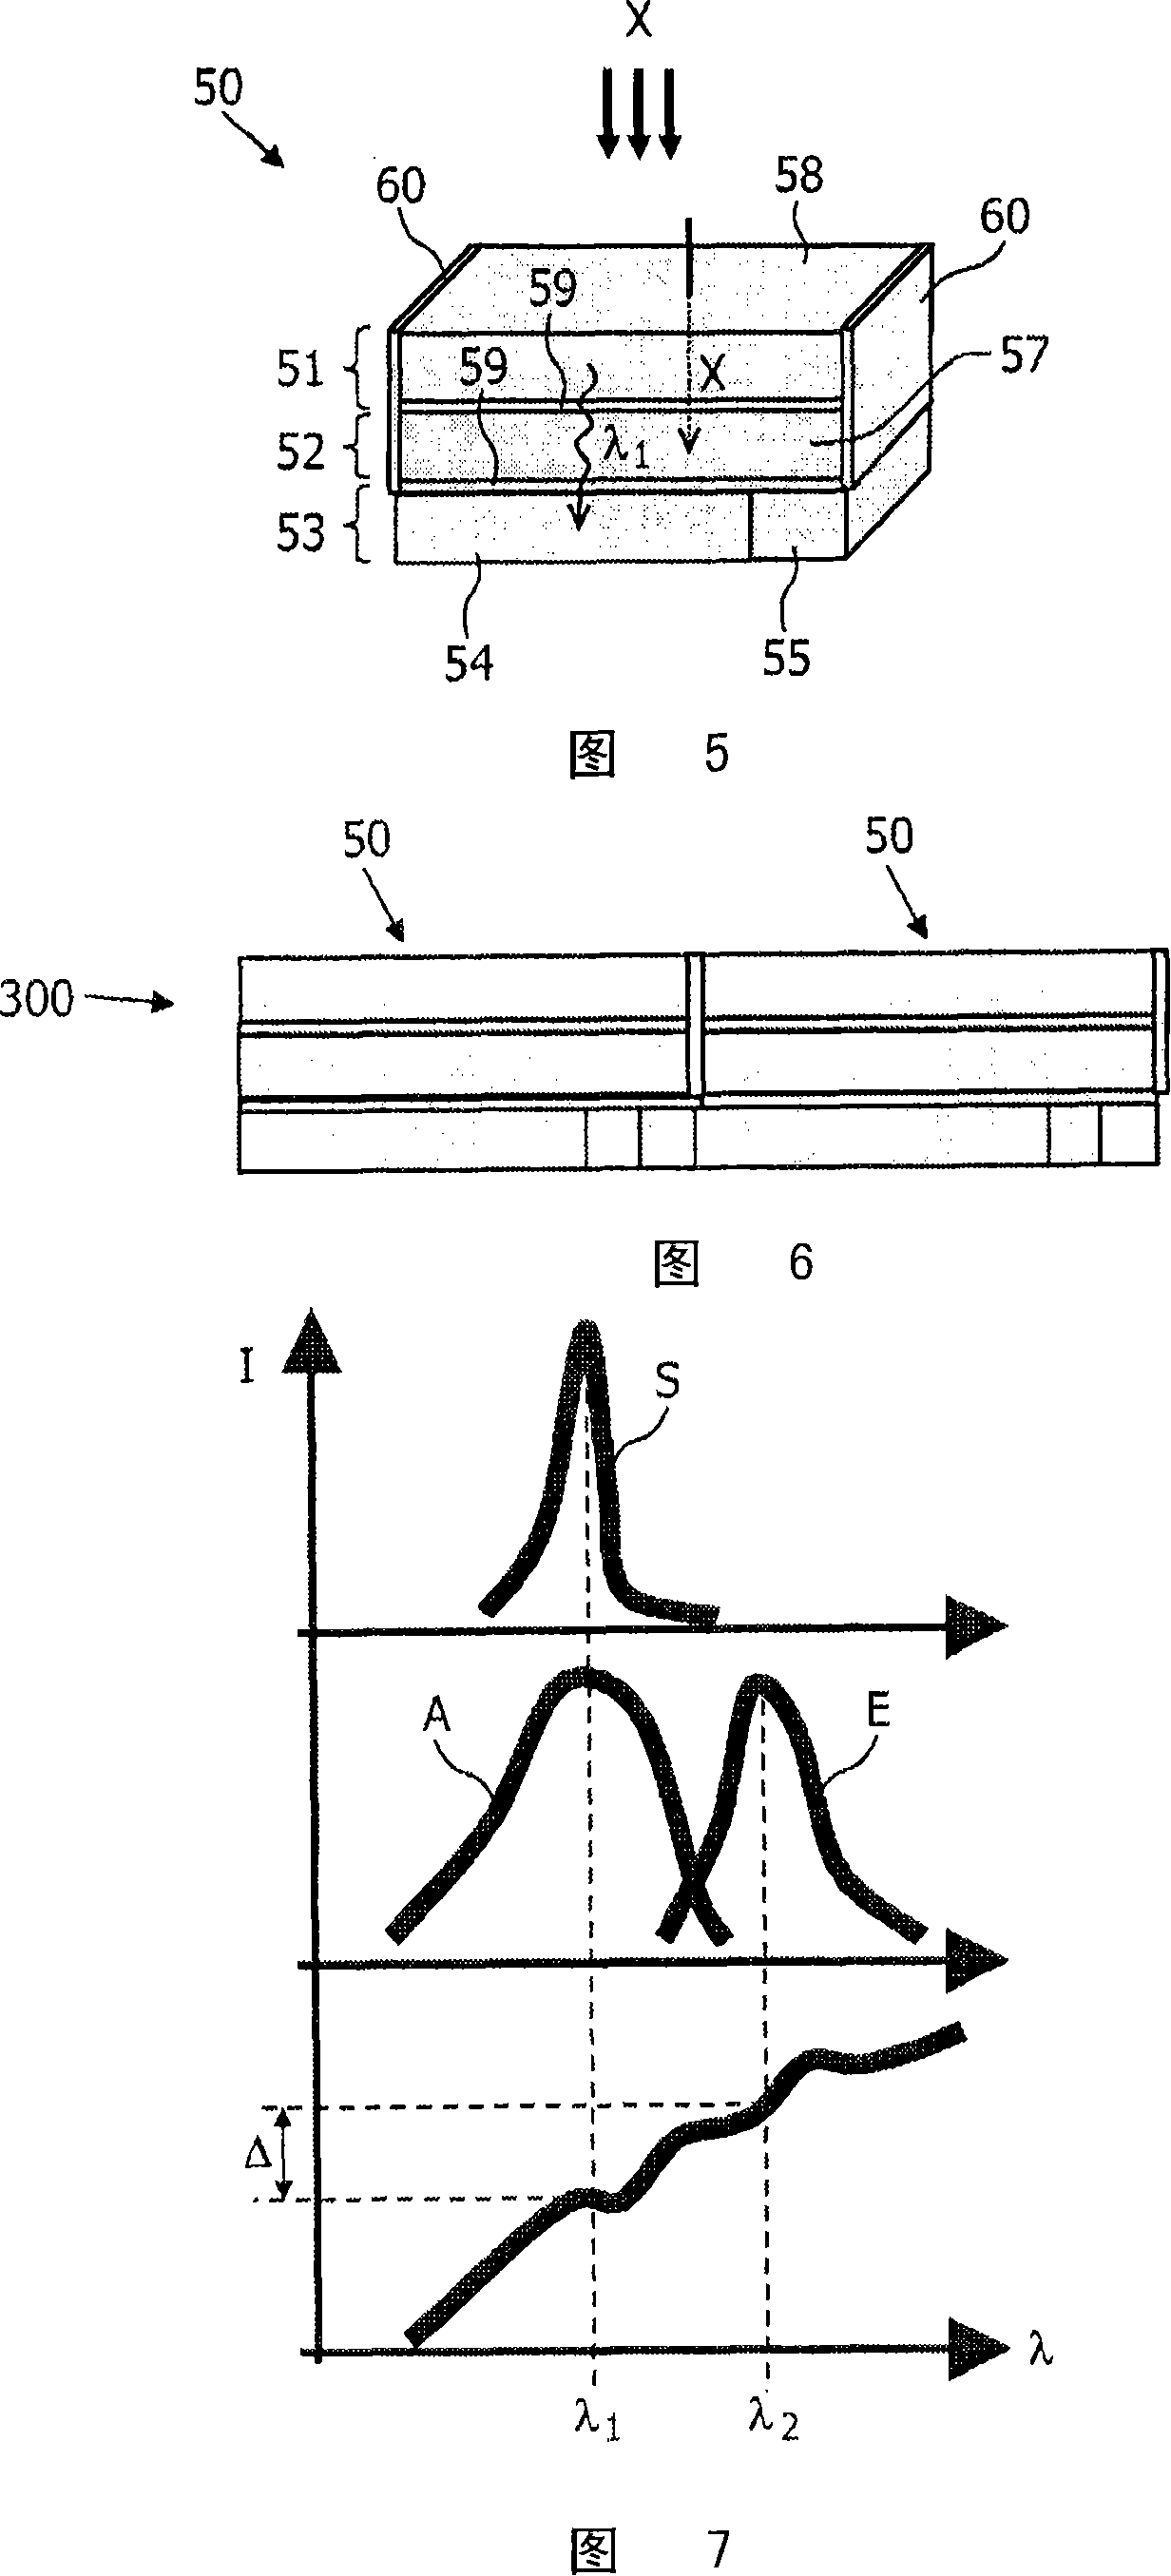 X-ray detector with in-pixel processing circuits